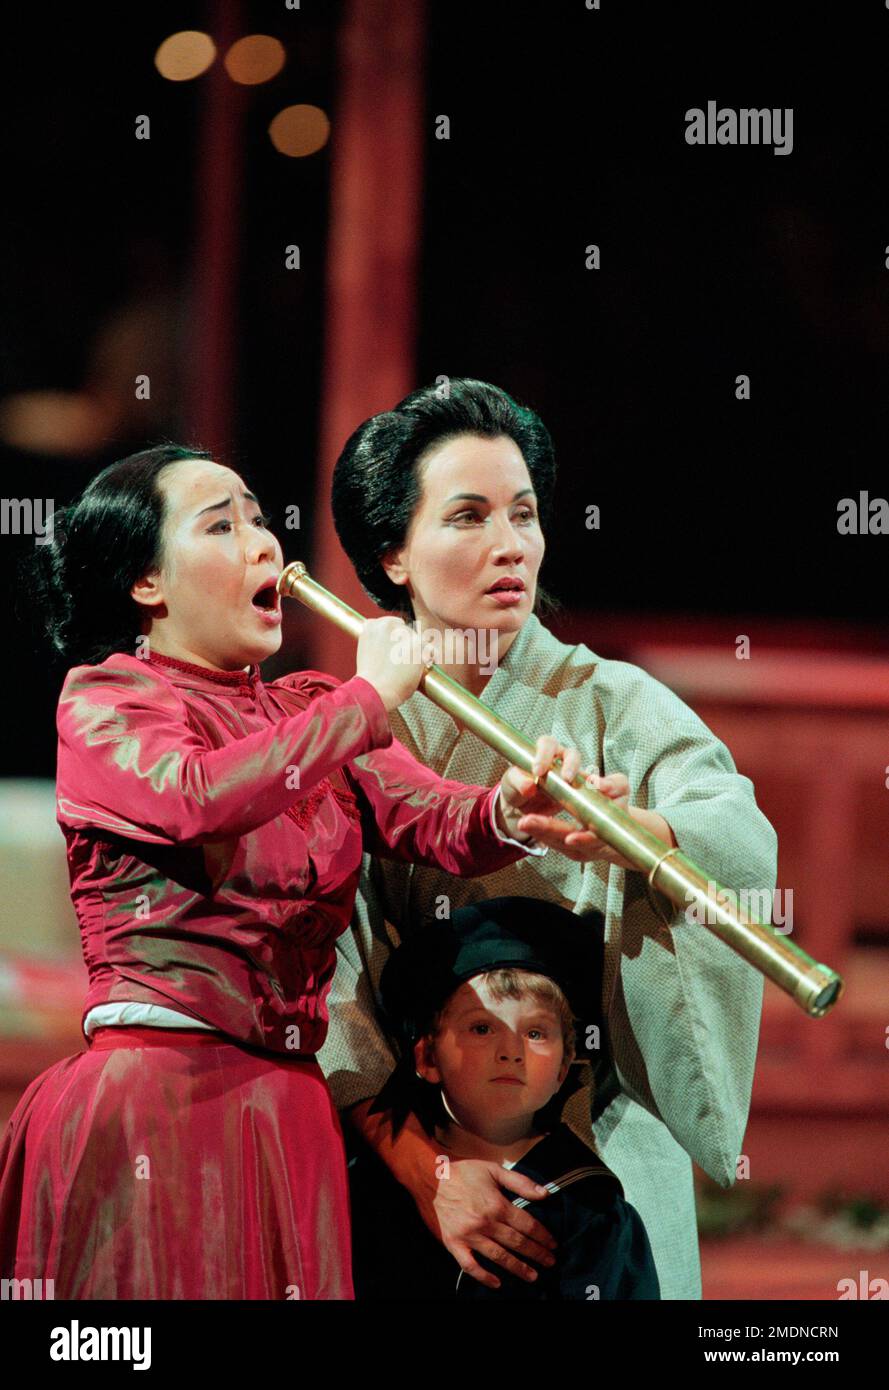 awaiting Pinkerton's return - l-r: Liping Zhang (Madam Butterfly), Marcia Bellamy (Suzuki) with Lachlan Freeman (Sorrow) in MADAM BUTTERFLY by Puccini at the Royal Albert Hall, London SW7  19/02/1998  a Raymond Gubbay production  conductor: Peter Robinson  design: David Roger  lighting: Andrew Bridge  director: David Freeman Stock Photo